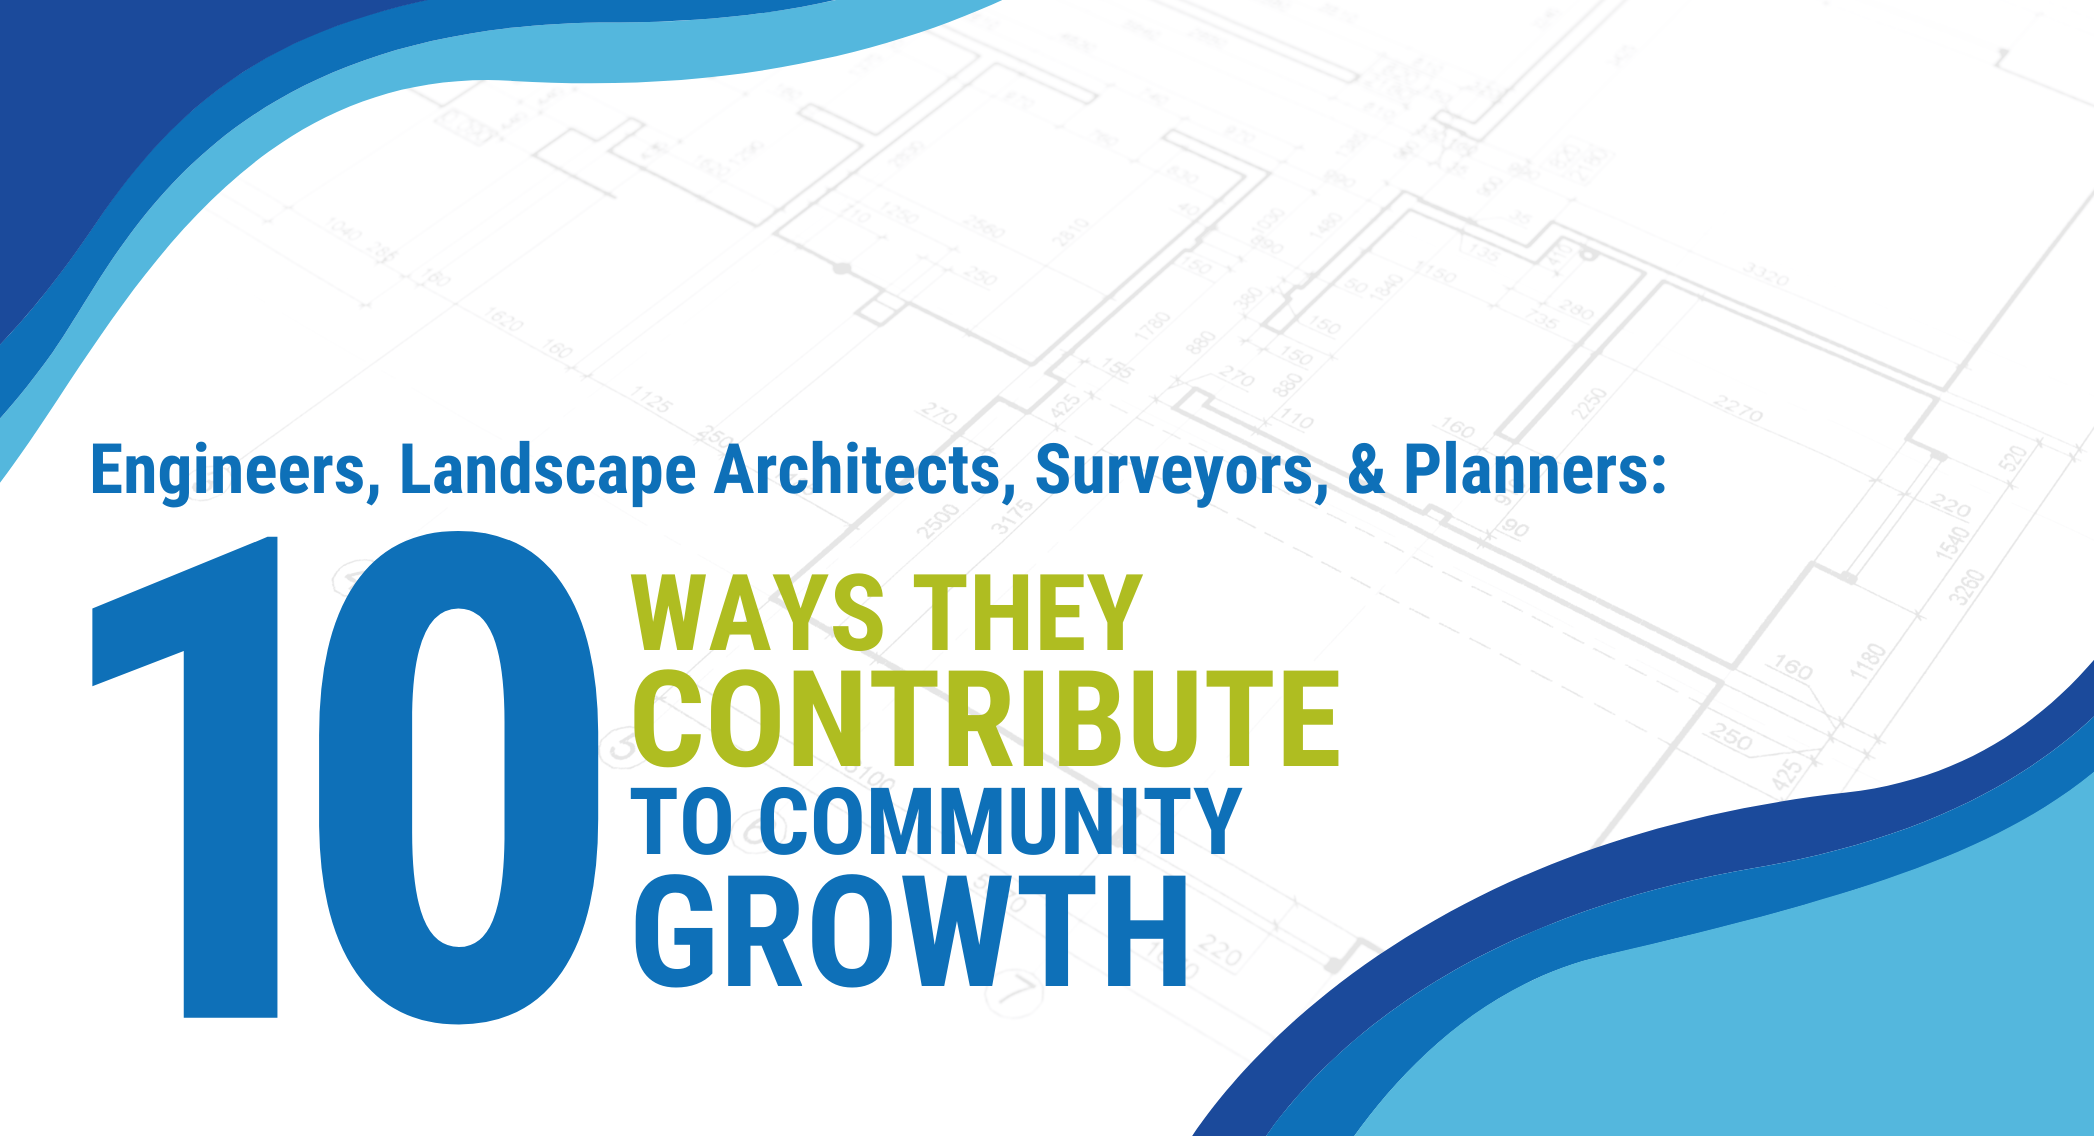 Engineers, Landscape Architects, Surveyors, and Planners: 10 Ways They Contribute to Community Growth.